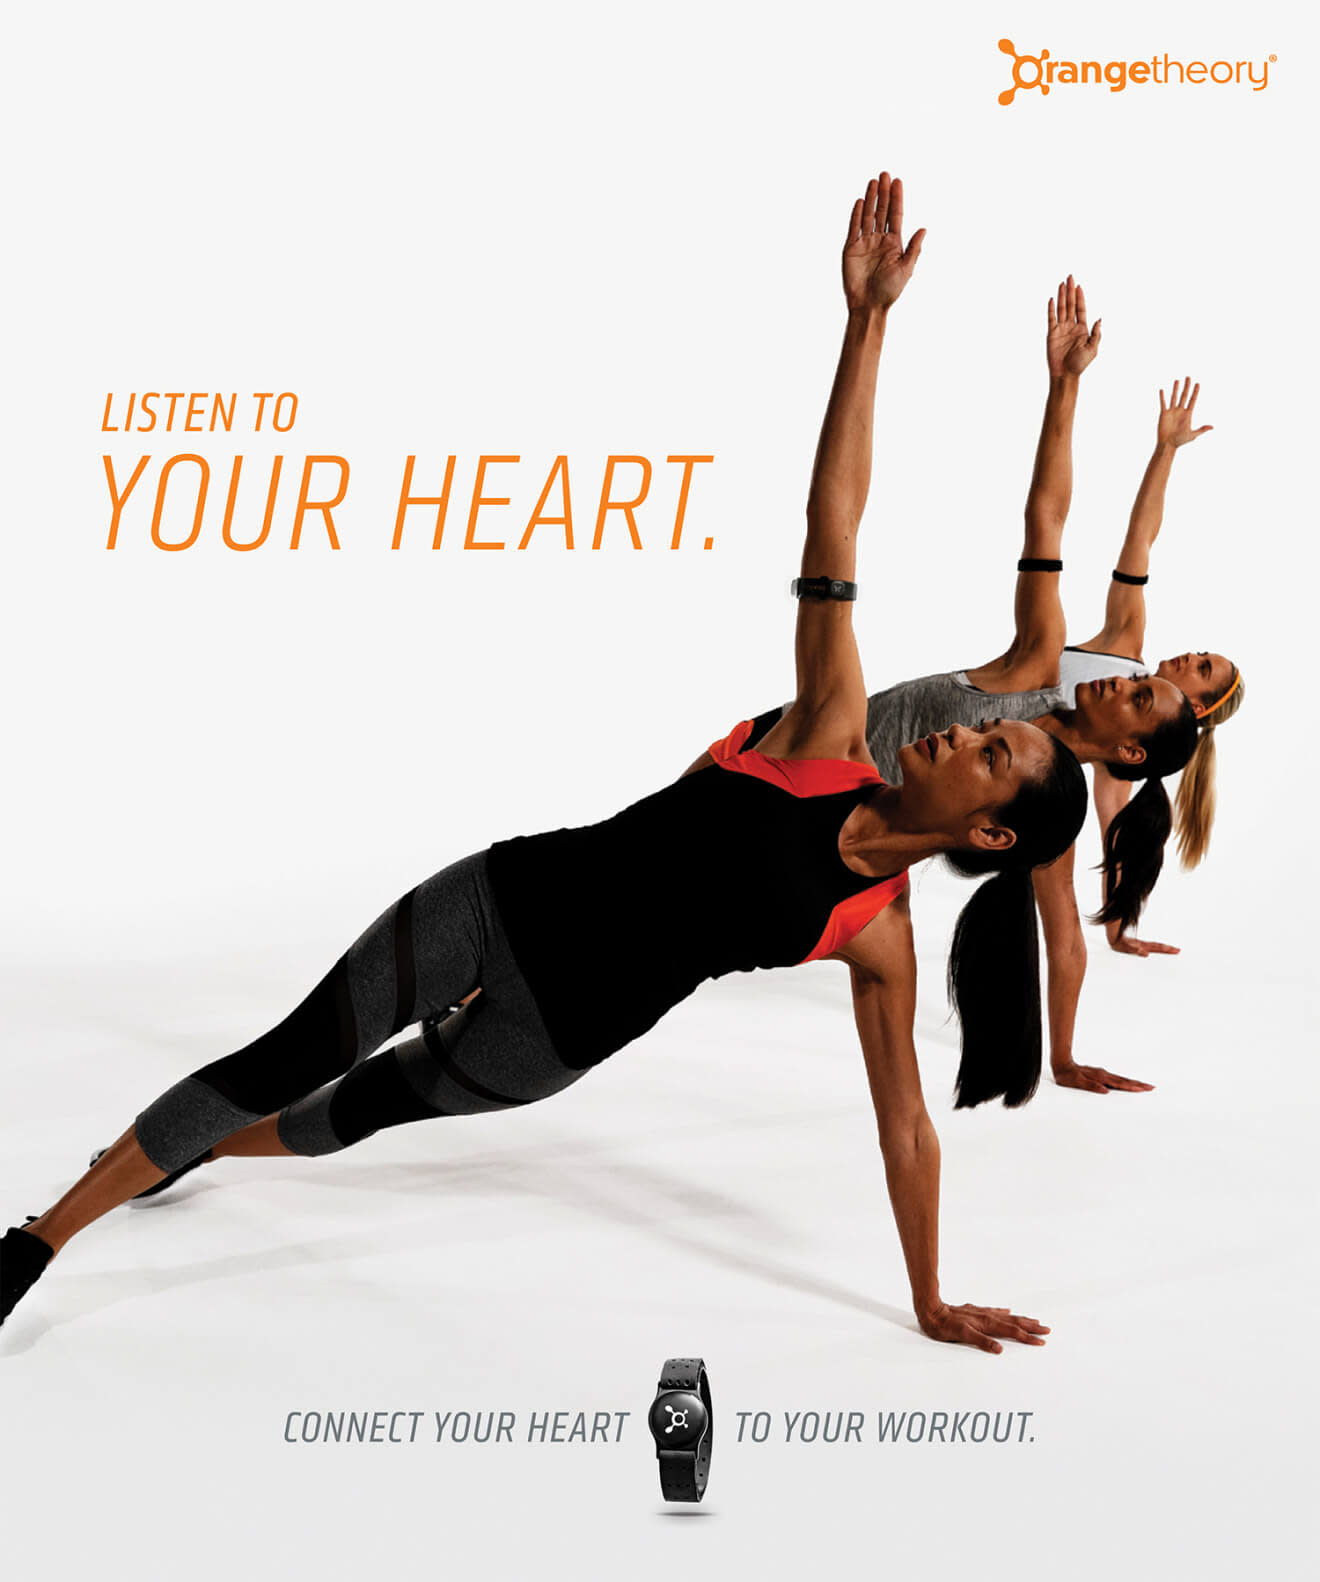 'Listen to your heart' Orangetheory campaign